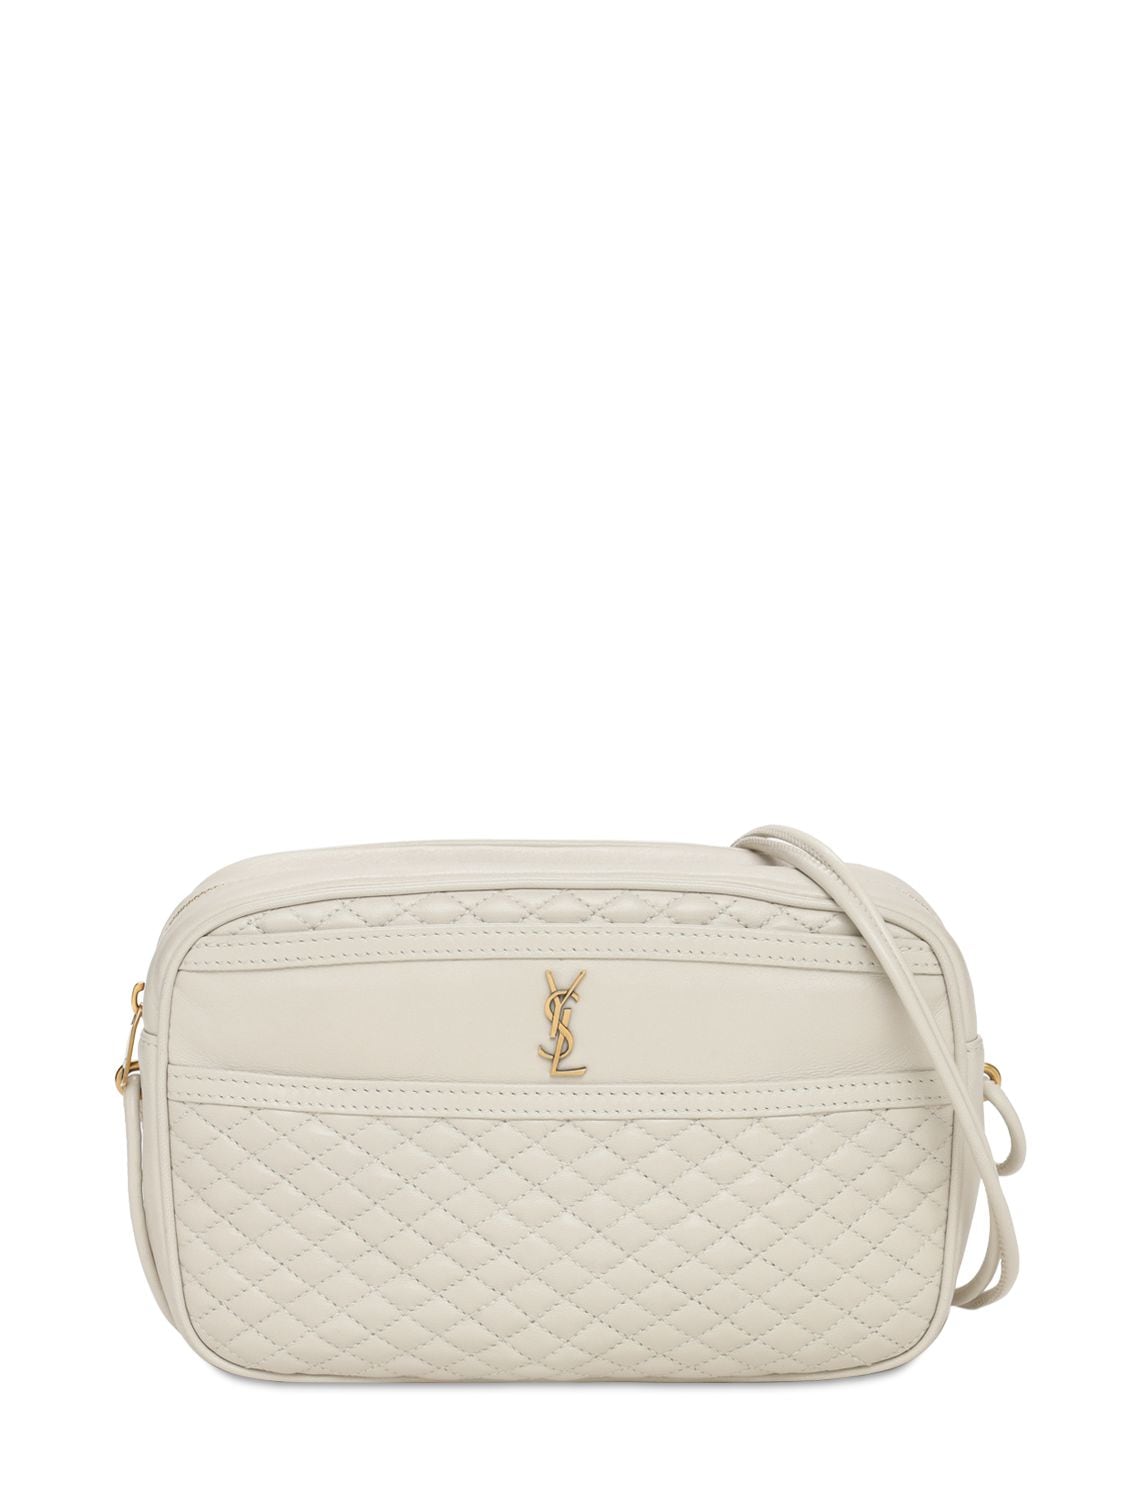 Saint Laurent Quilted Ysl Crossbody Camera Bag In 9207 Crema Soft